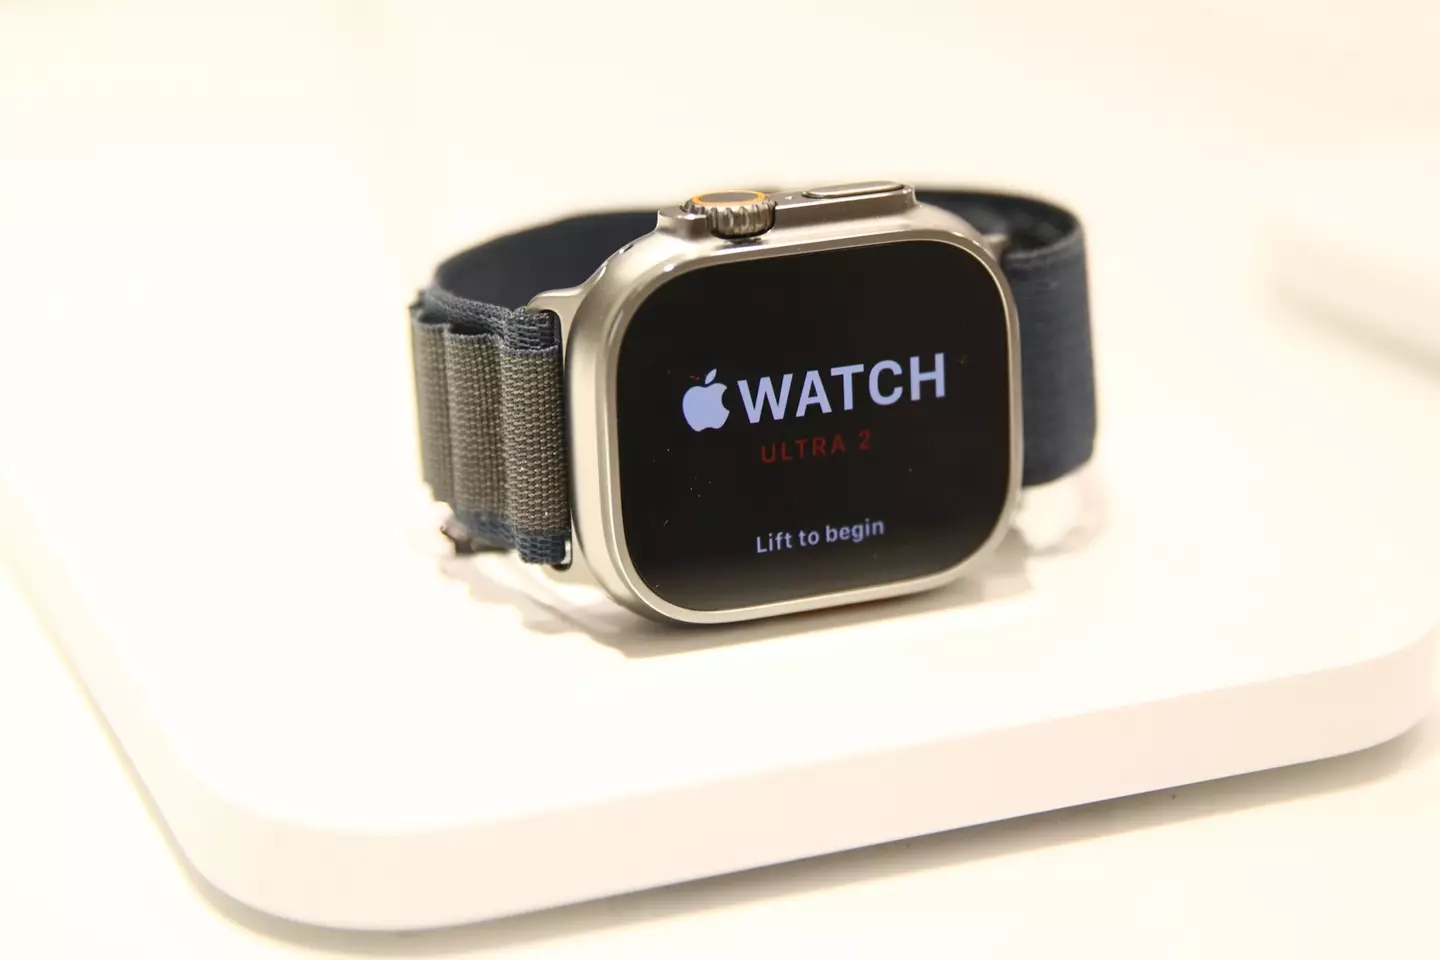 The Apple Watch Ultra 2 will soon be unable to purchase.